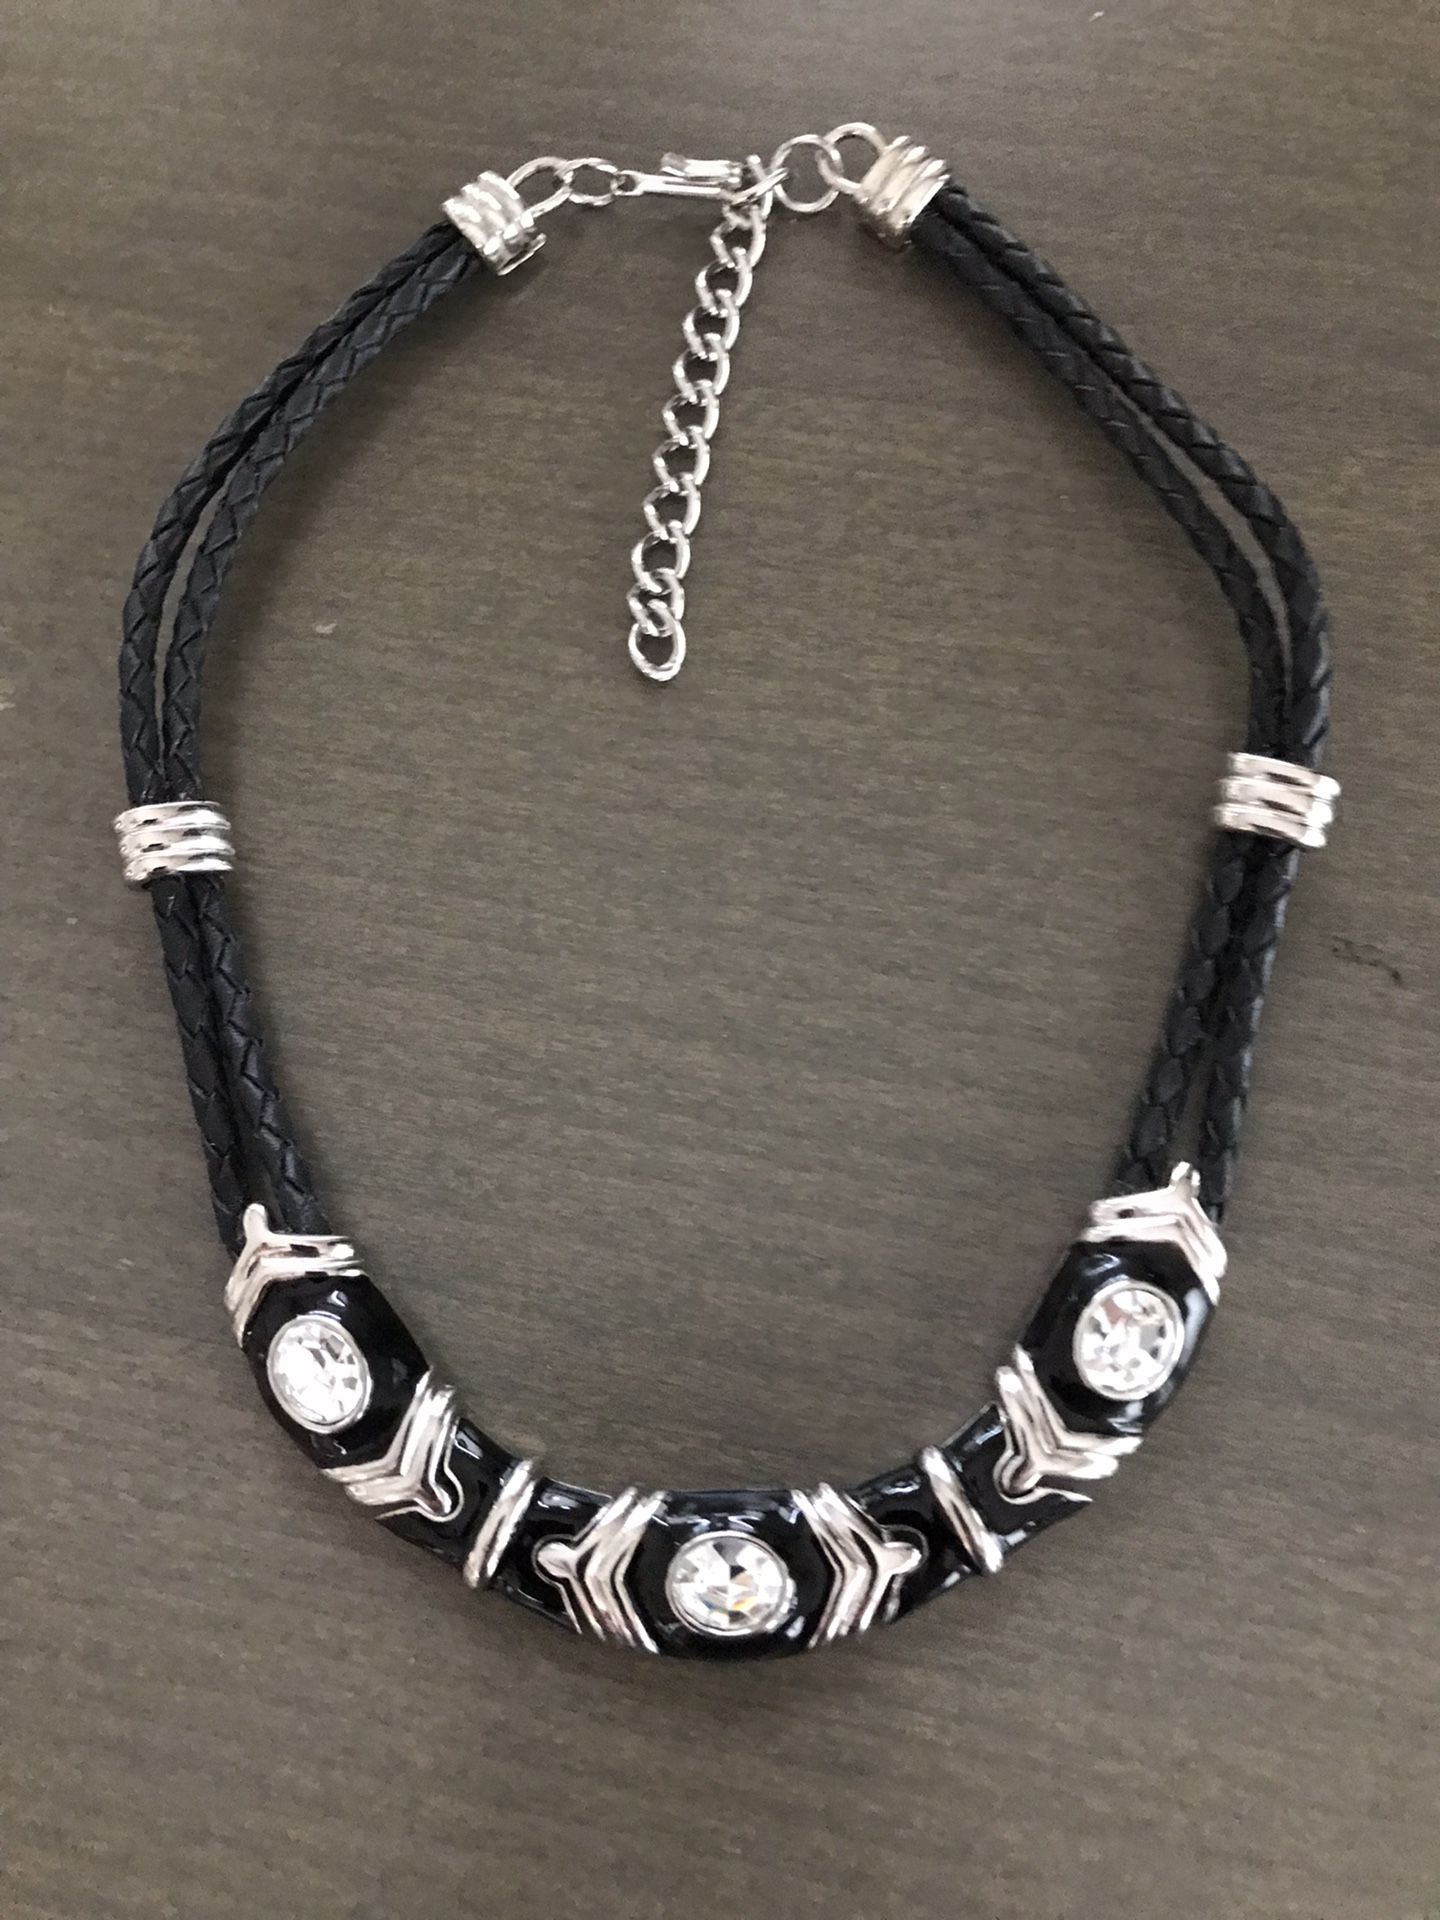 NOLAN MILLER Necklace Leather  Cord,Black Enamel ,Clear Crystals 